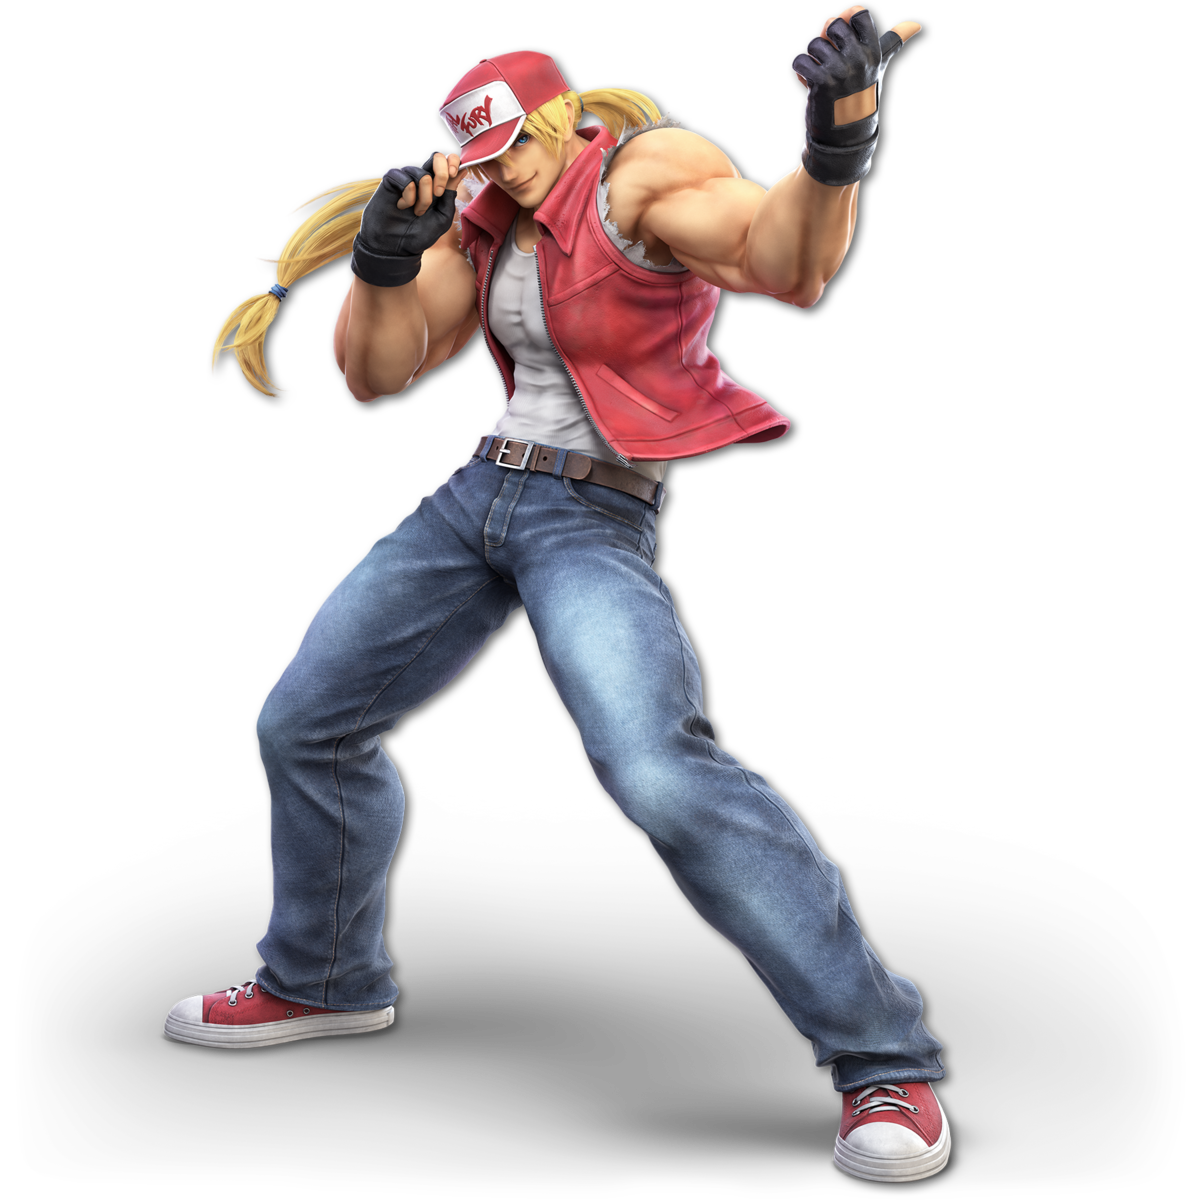 Fall Guys Fatal Fury Skins: Price, Release Date & What You Should Know